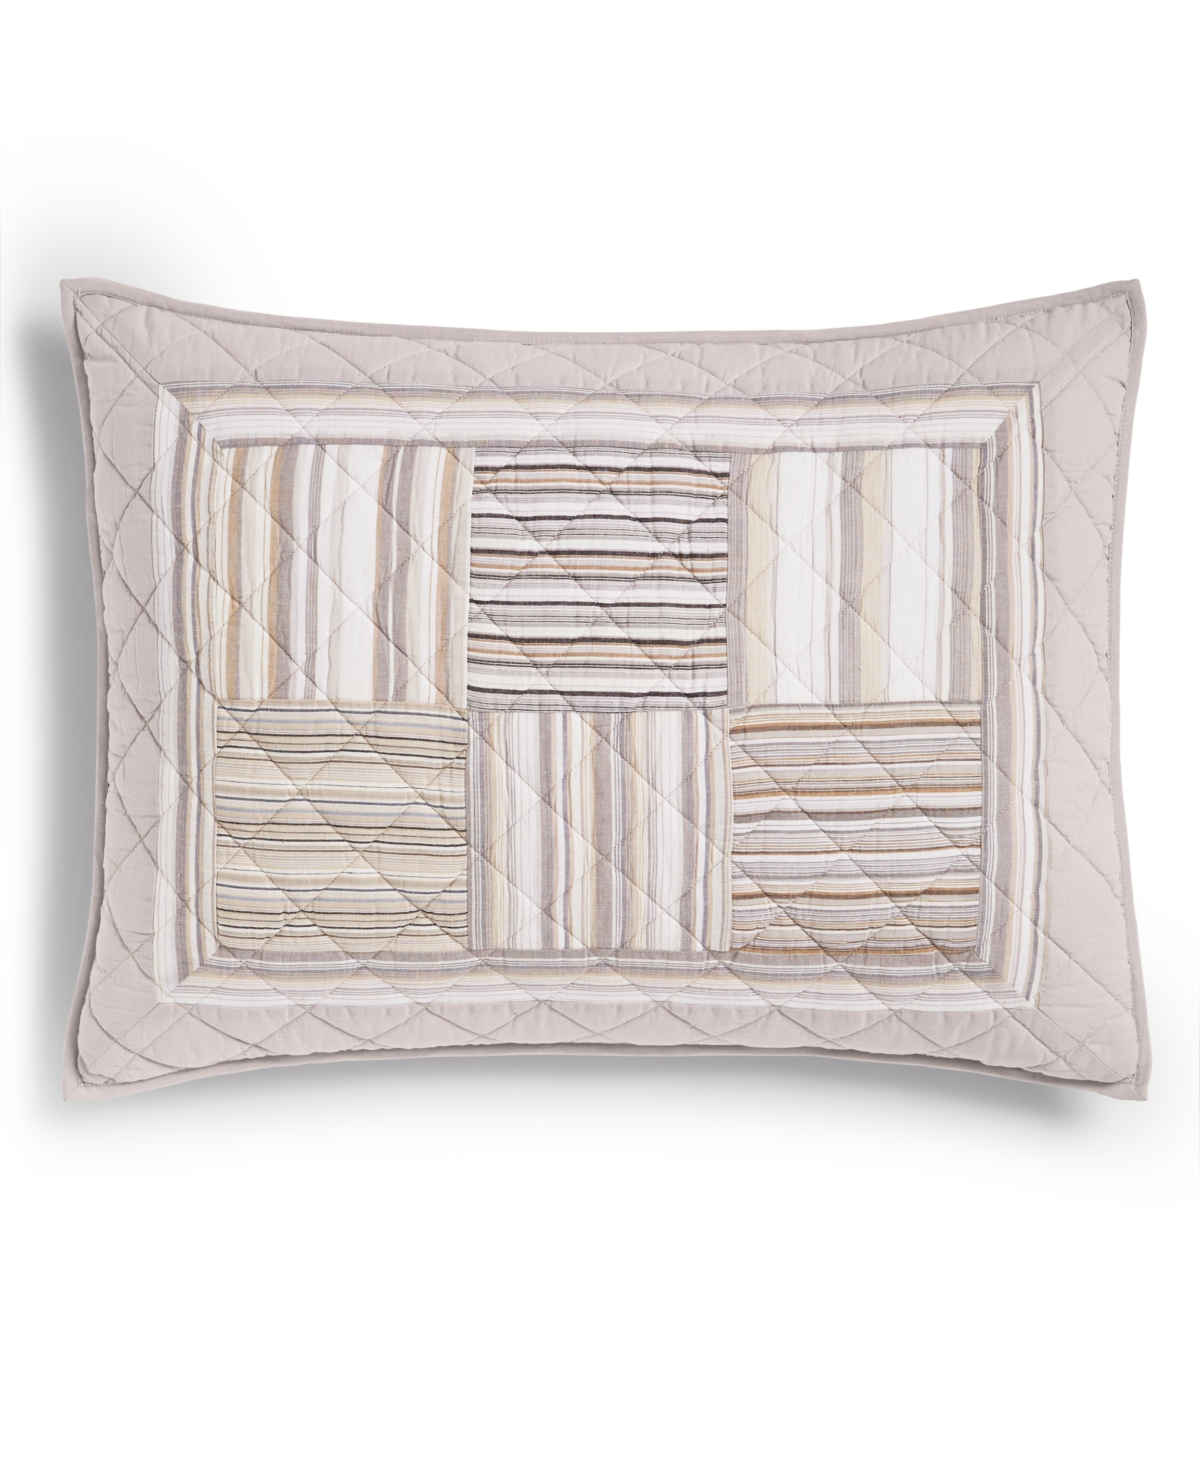 Neutral Stripe Patchwork Sham, King, Created for Macy's - Neutral Combo